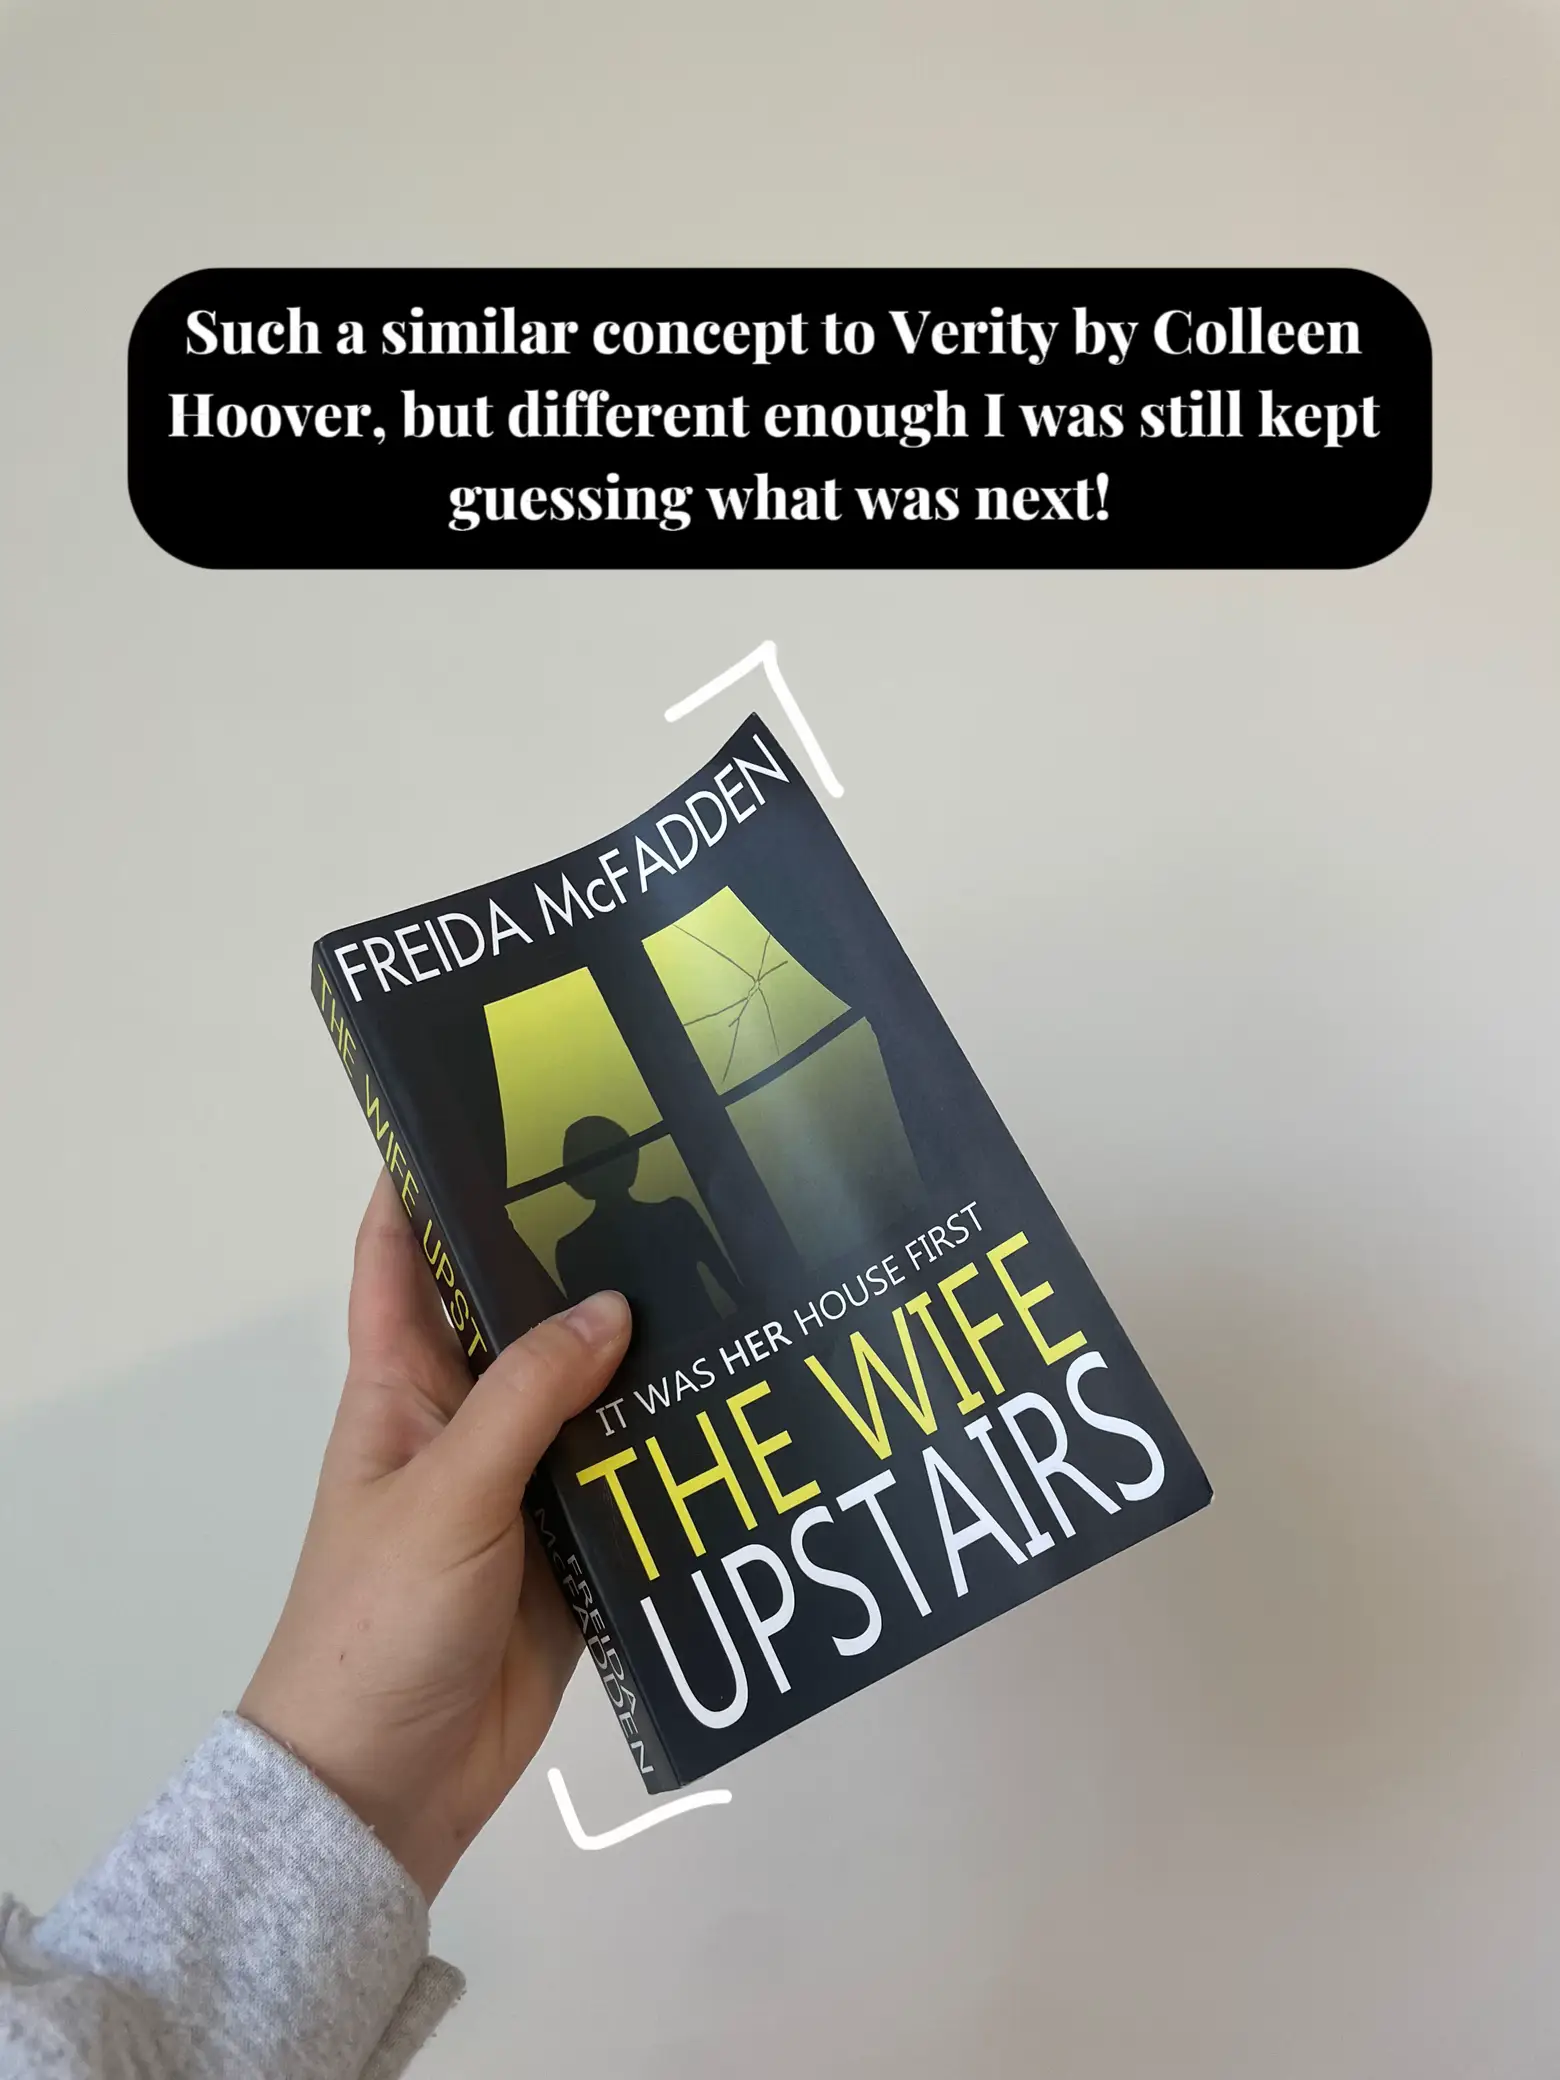 Verity By Colleen Hoover: A Nerd's Book Review